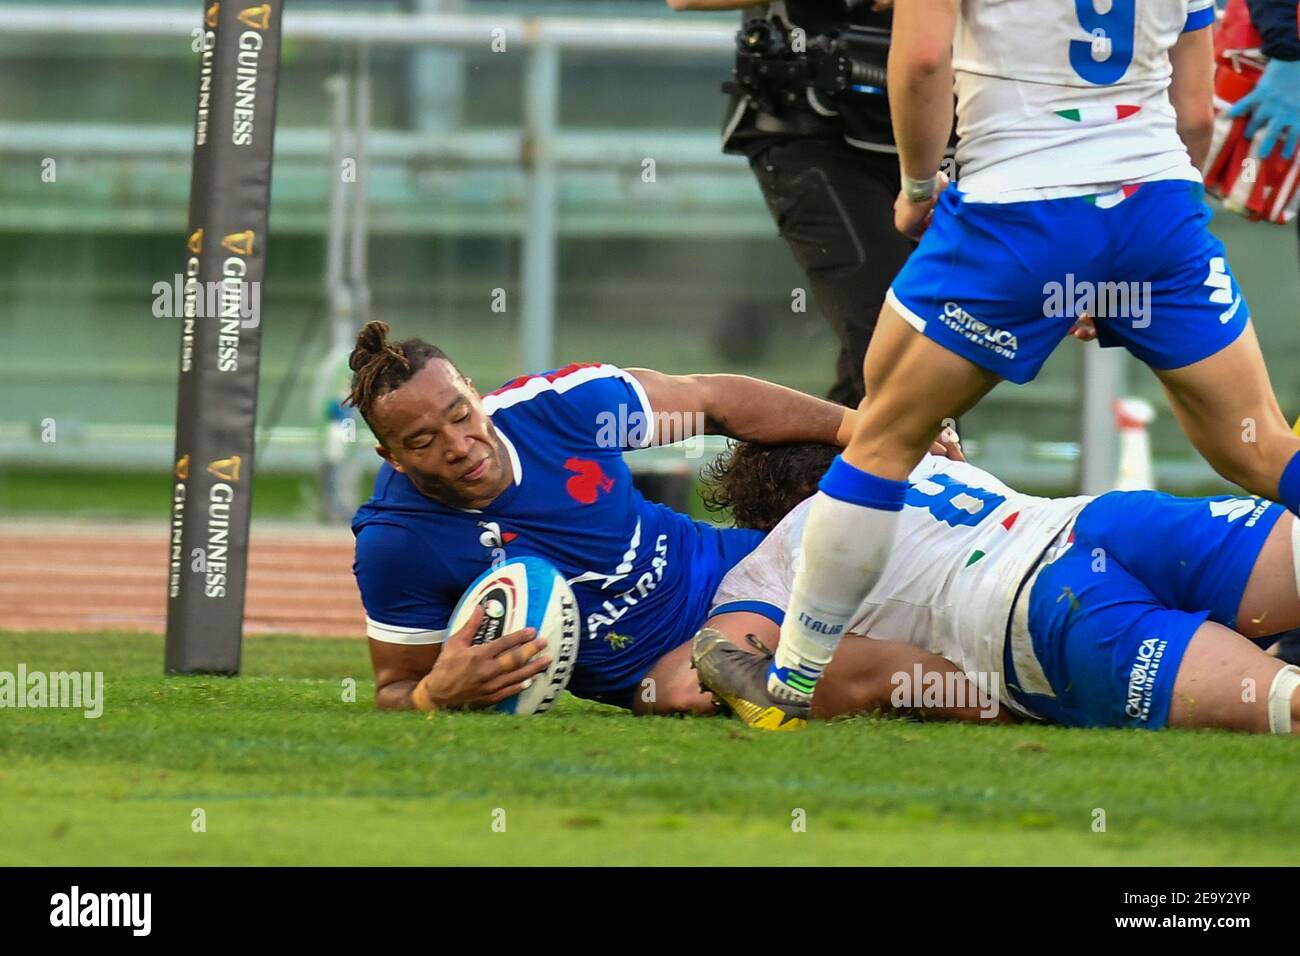 Rome, Italy. 6th Feb, 2021. Rome, Italy, Stadio Olimpico, February 06, 2021, Teddy Thomas (France) on try during Italy vs France - Rugby Six Nations match Credit: Carlo Cappuccitti/LPS/ZUMA Wire/Alamy Live News Stock Photo